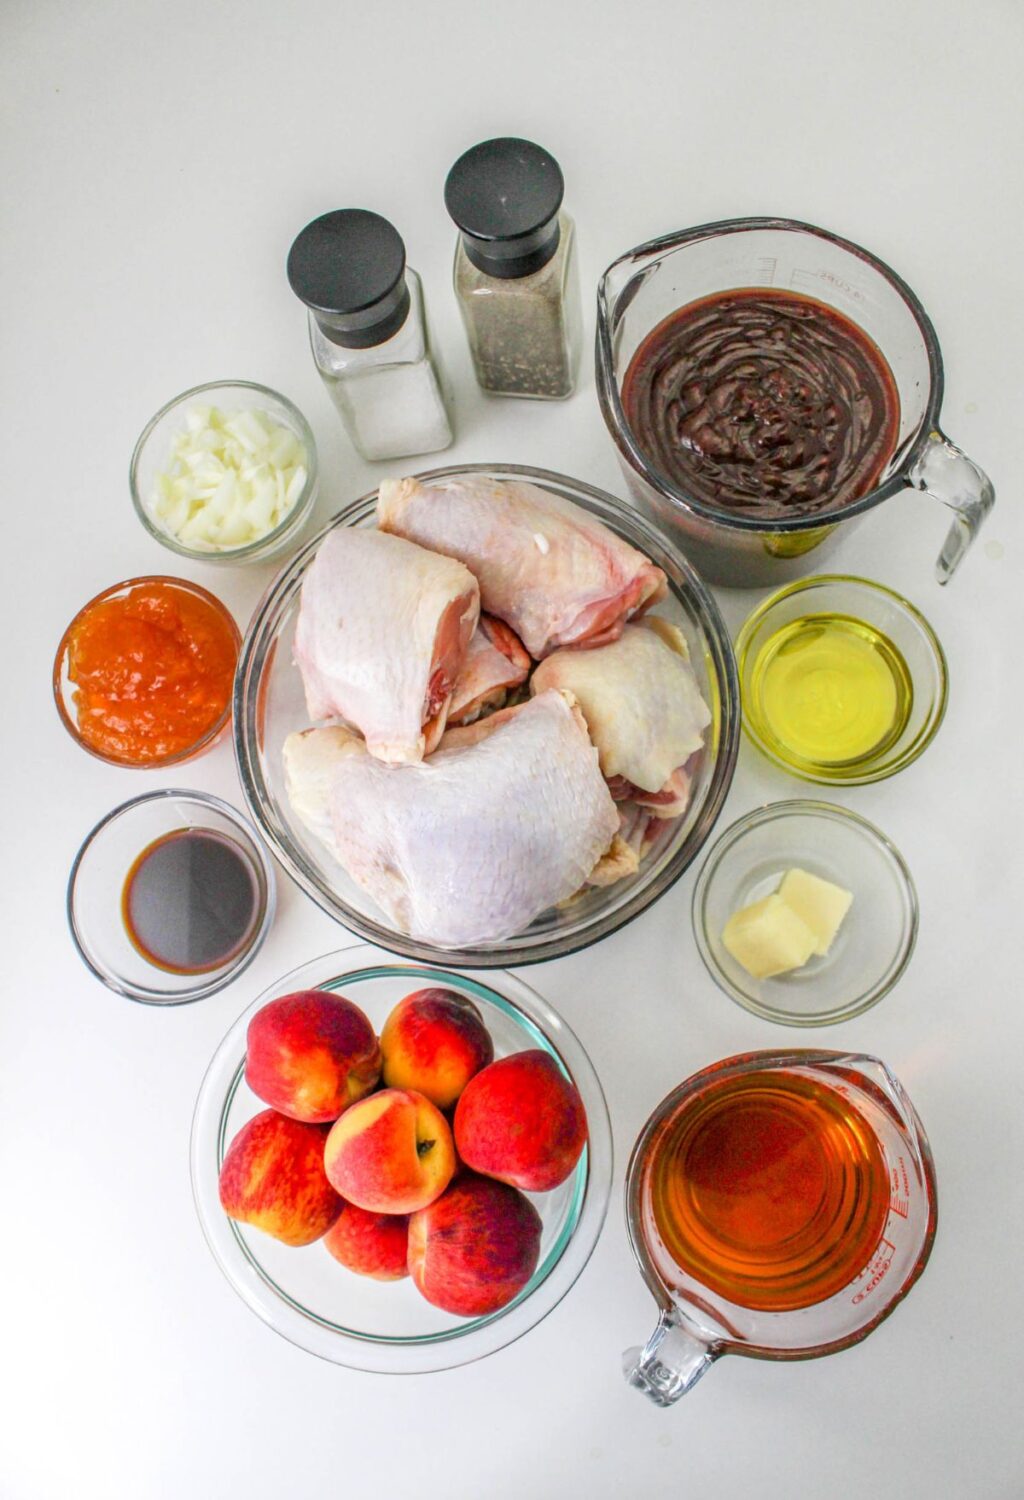 The ingredients for a chicken and peach dish are laid out on a white surface.